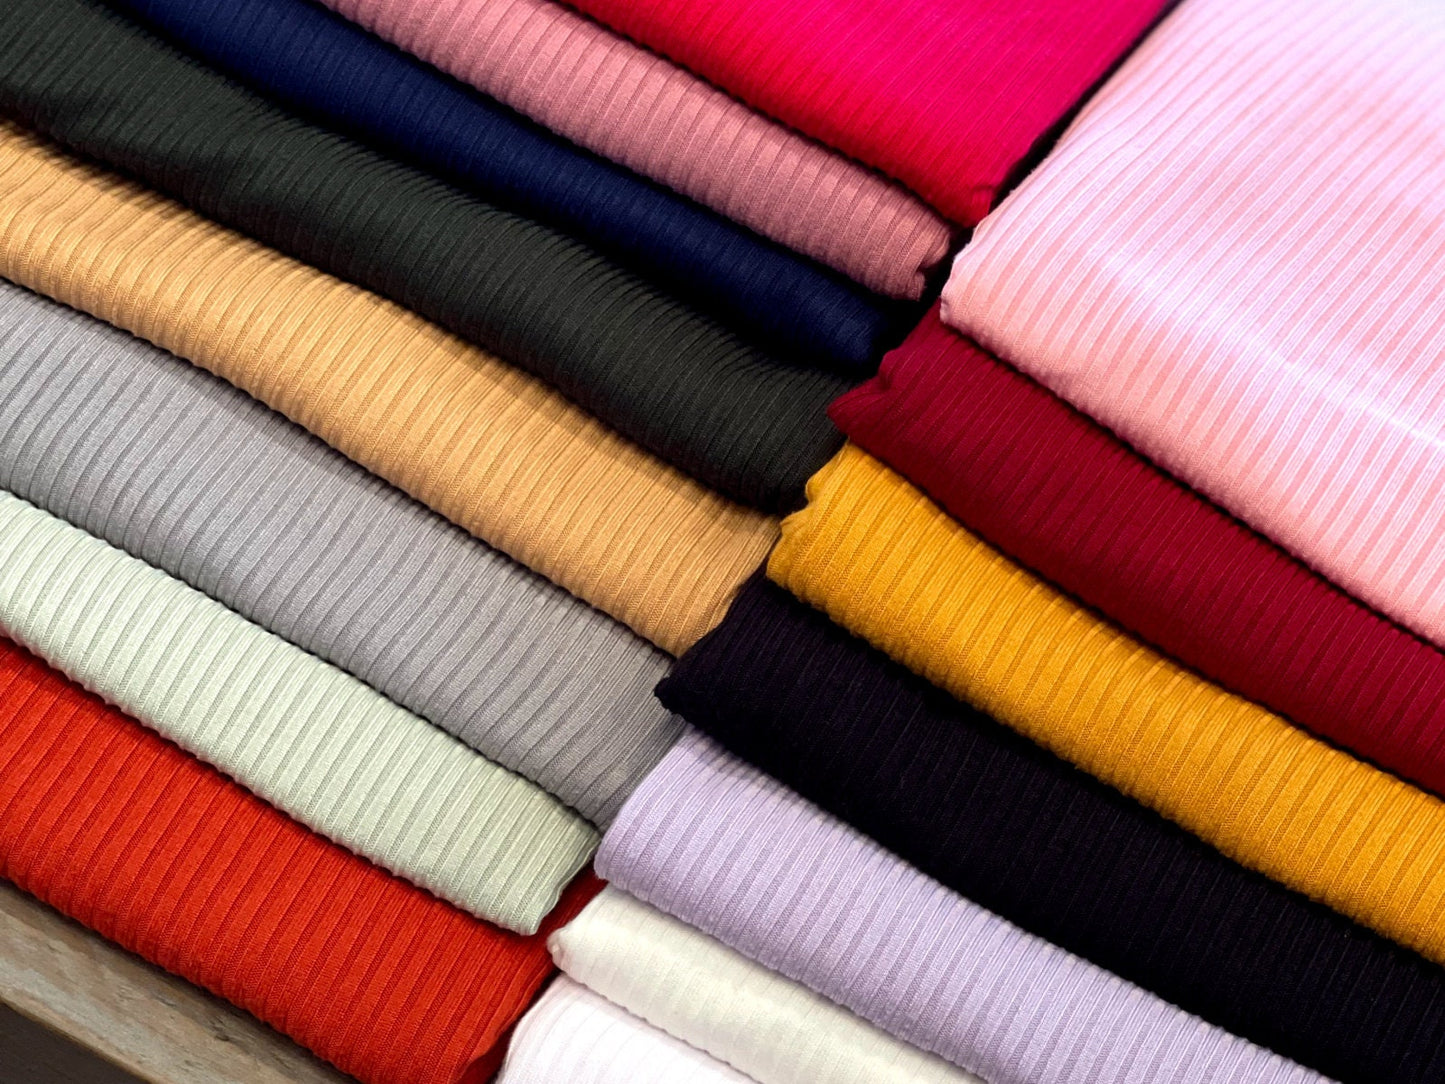 Rib Knit Fabric by the Yard Ribbed Jersey Stretchy Soft Polyester Stretch Fabric 1 Yard